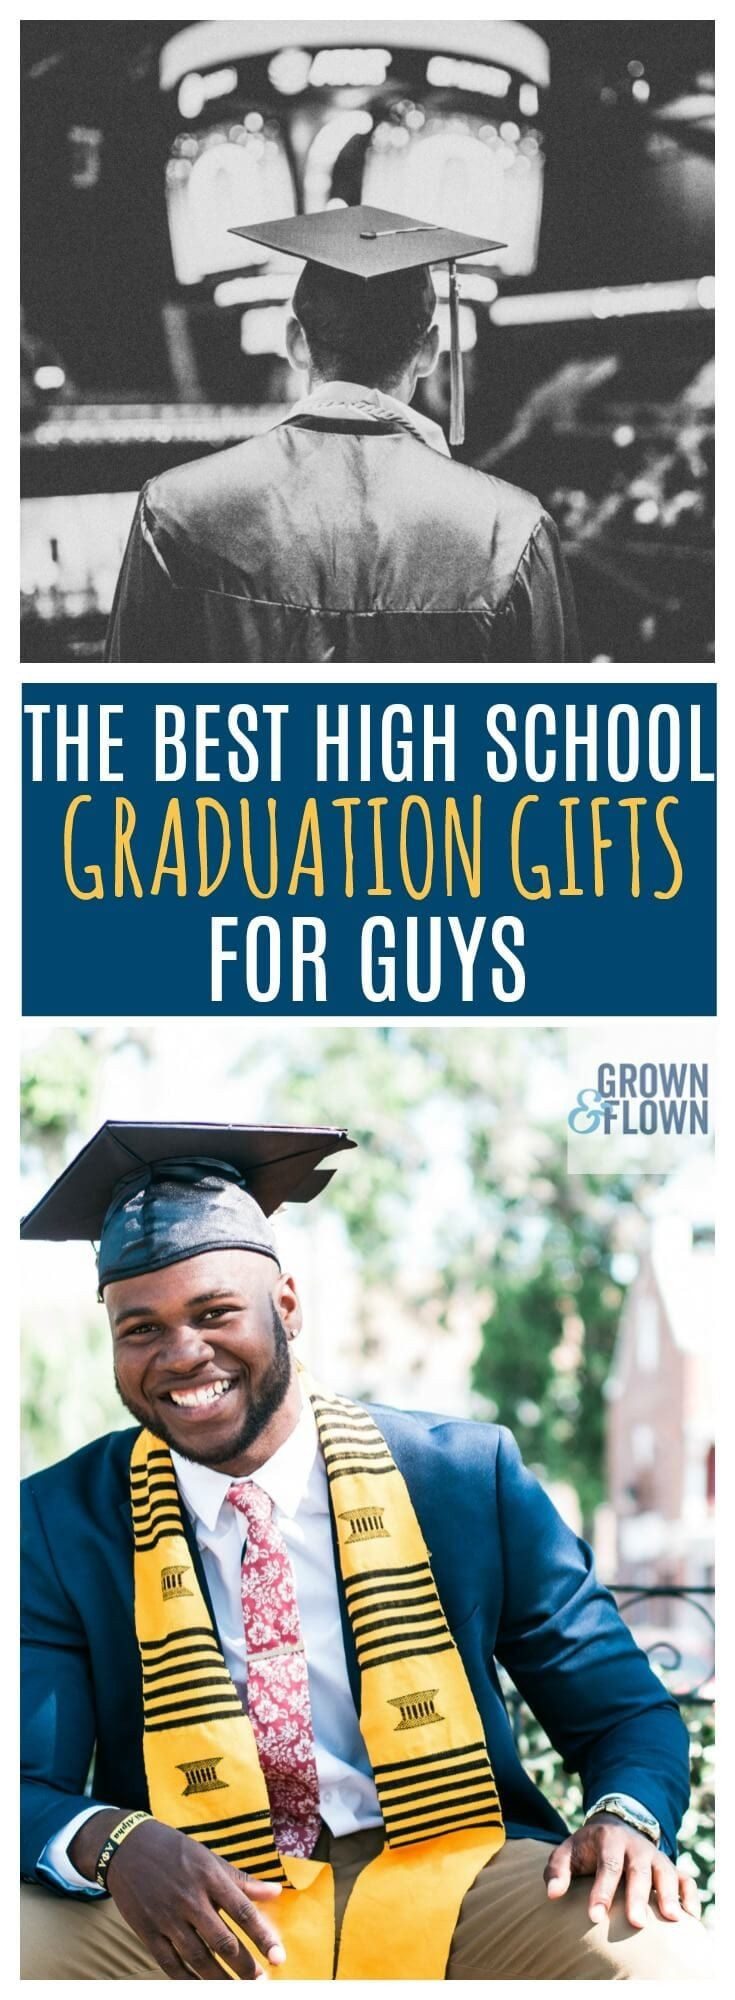 Phd Graduation Gift Ideas For Him
 2020 High School Graduation Gifts for Guys They Will Love